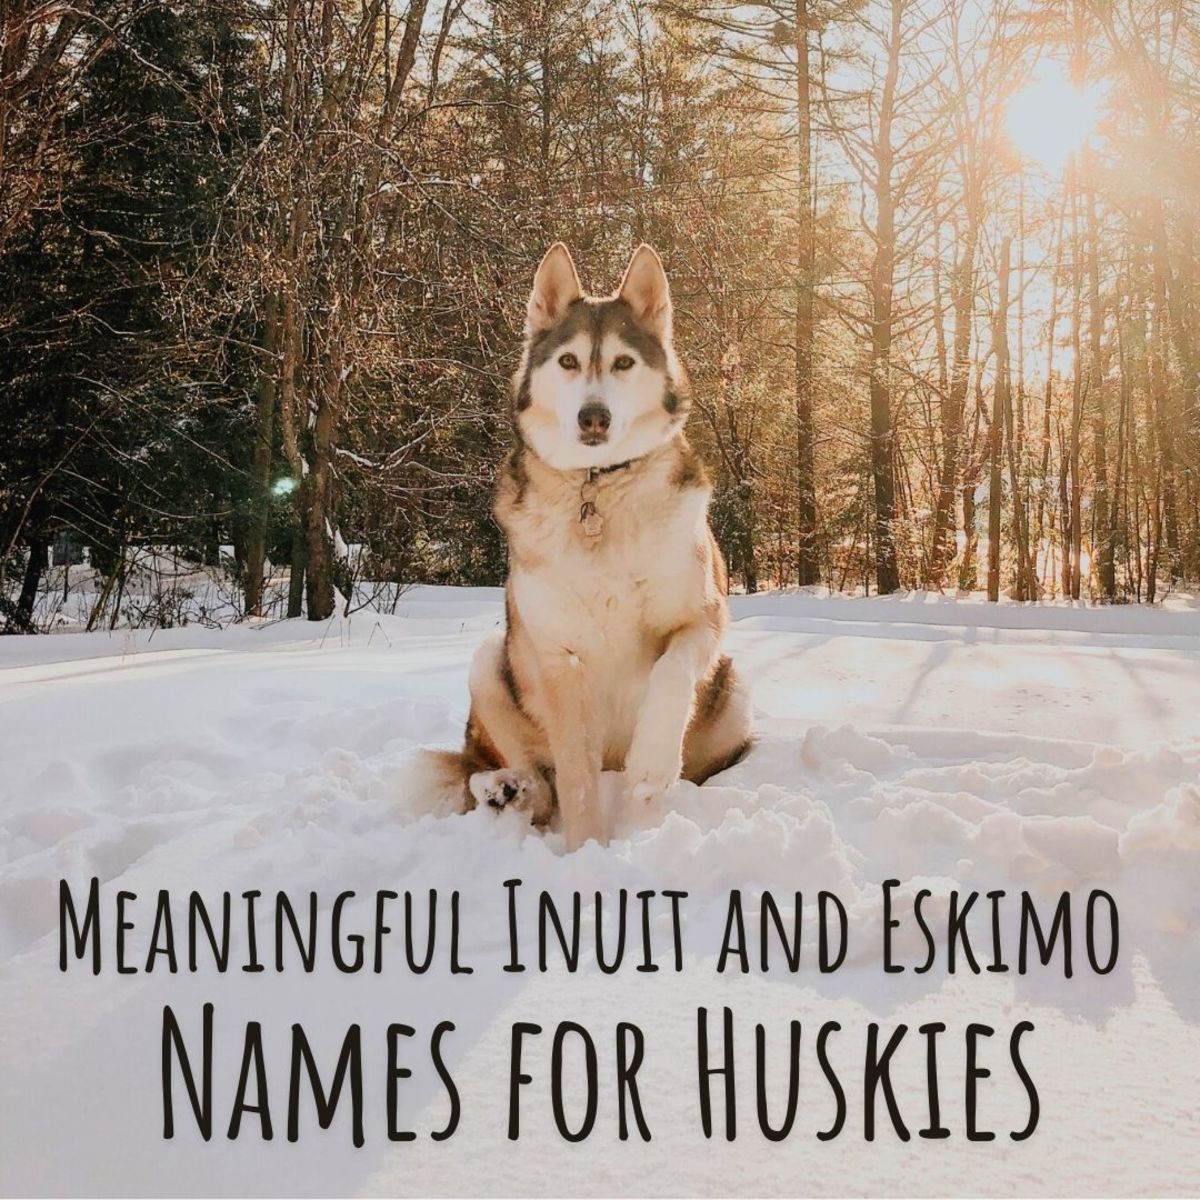 Your Husky is affectionate, friendly with dogs and people, intelligent, and athletic. Find an Inuit name that reflects its breed's heritage and personality.